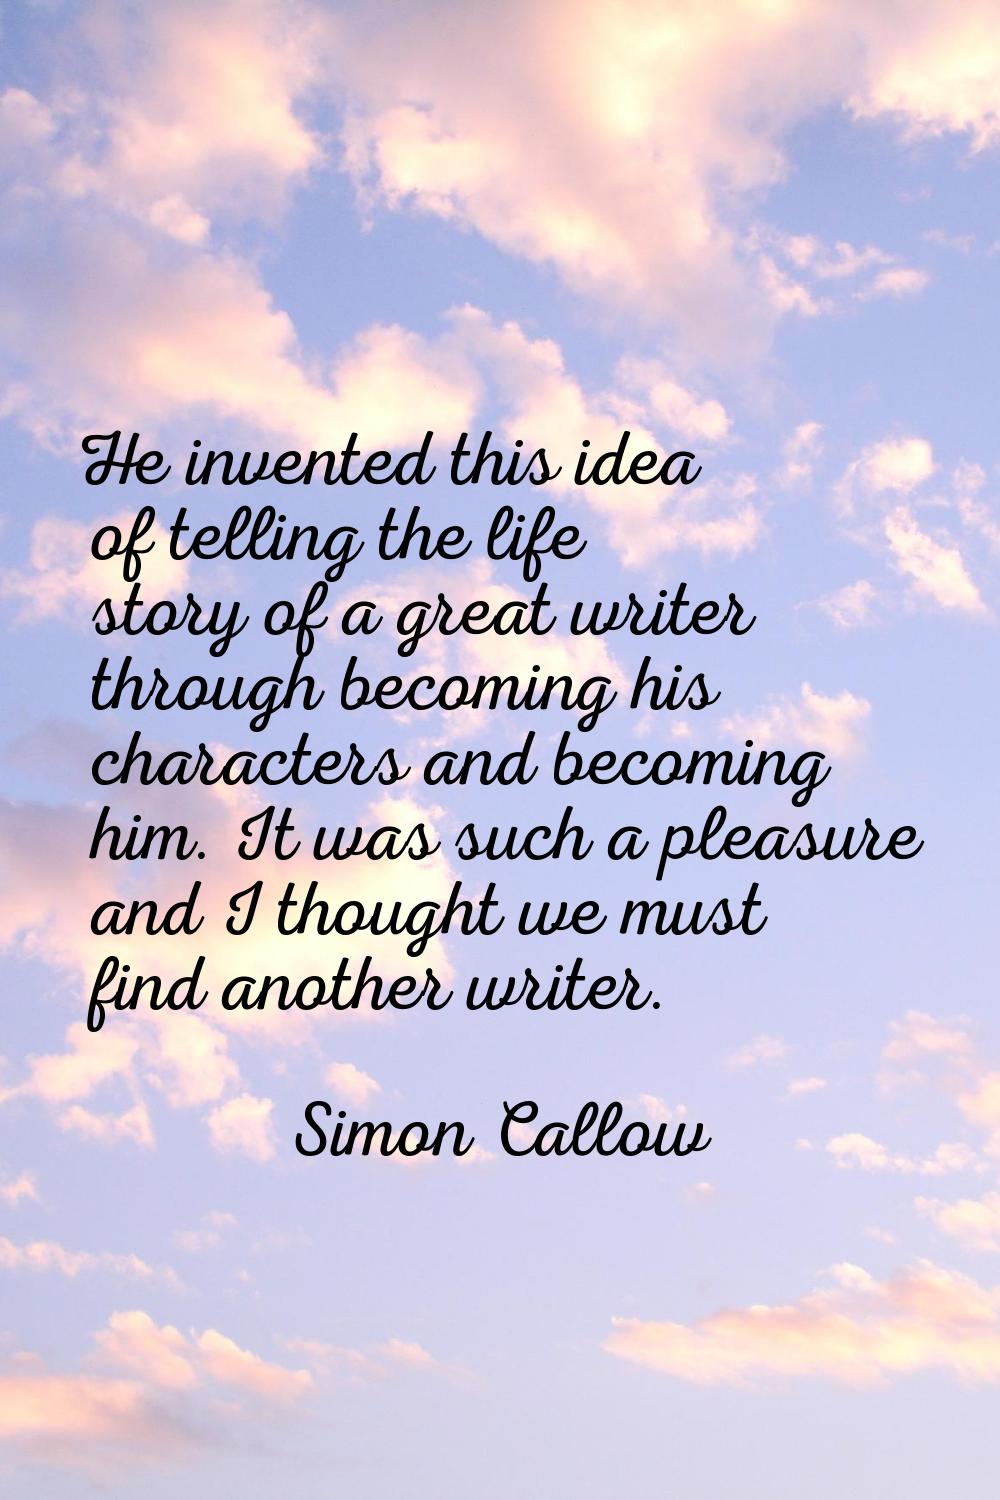 He invented this idea of telling the life story of a great writer through becoming his characters a